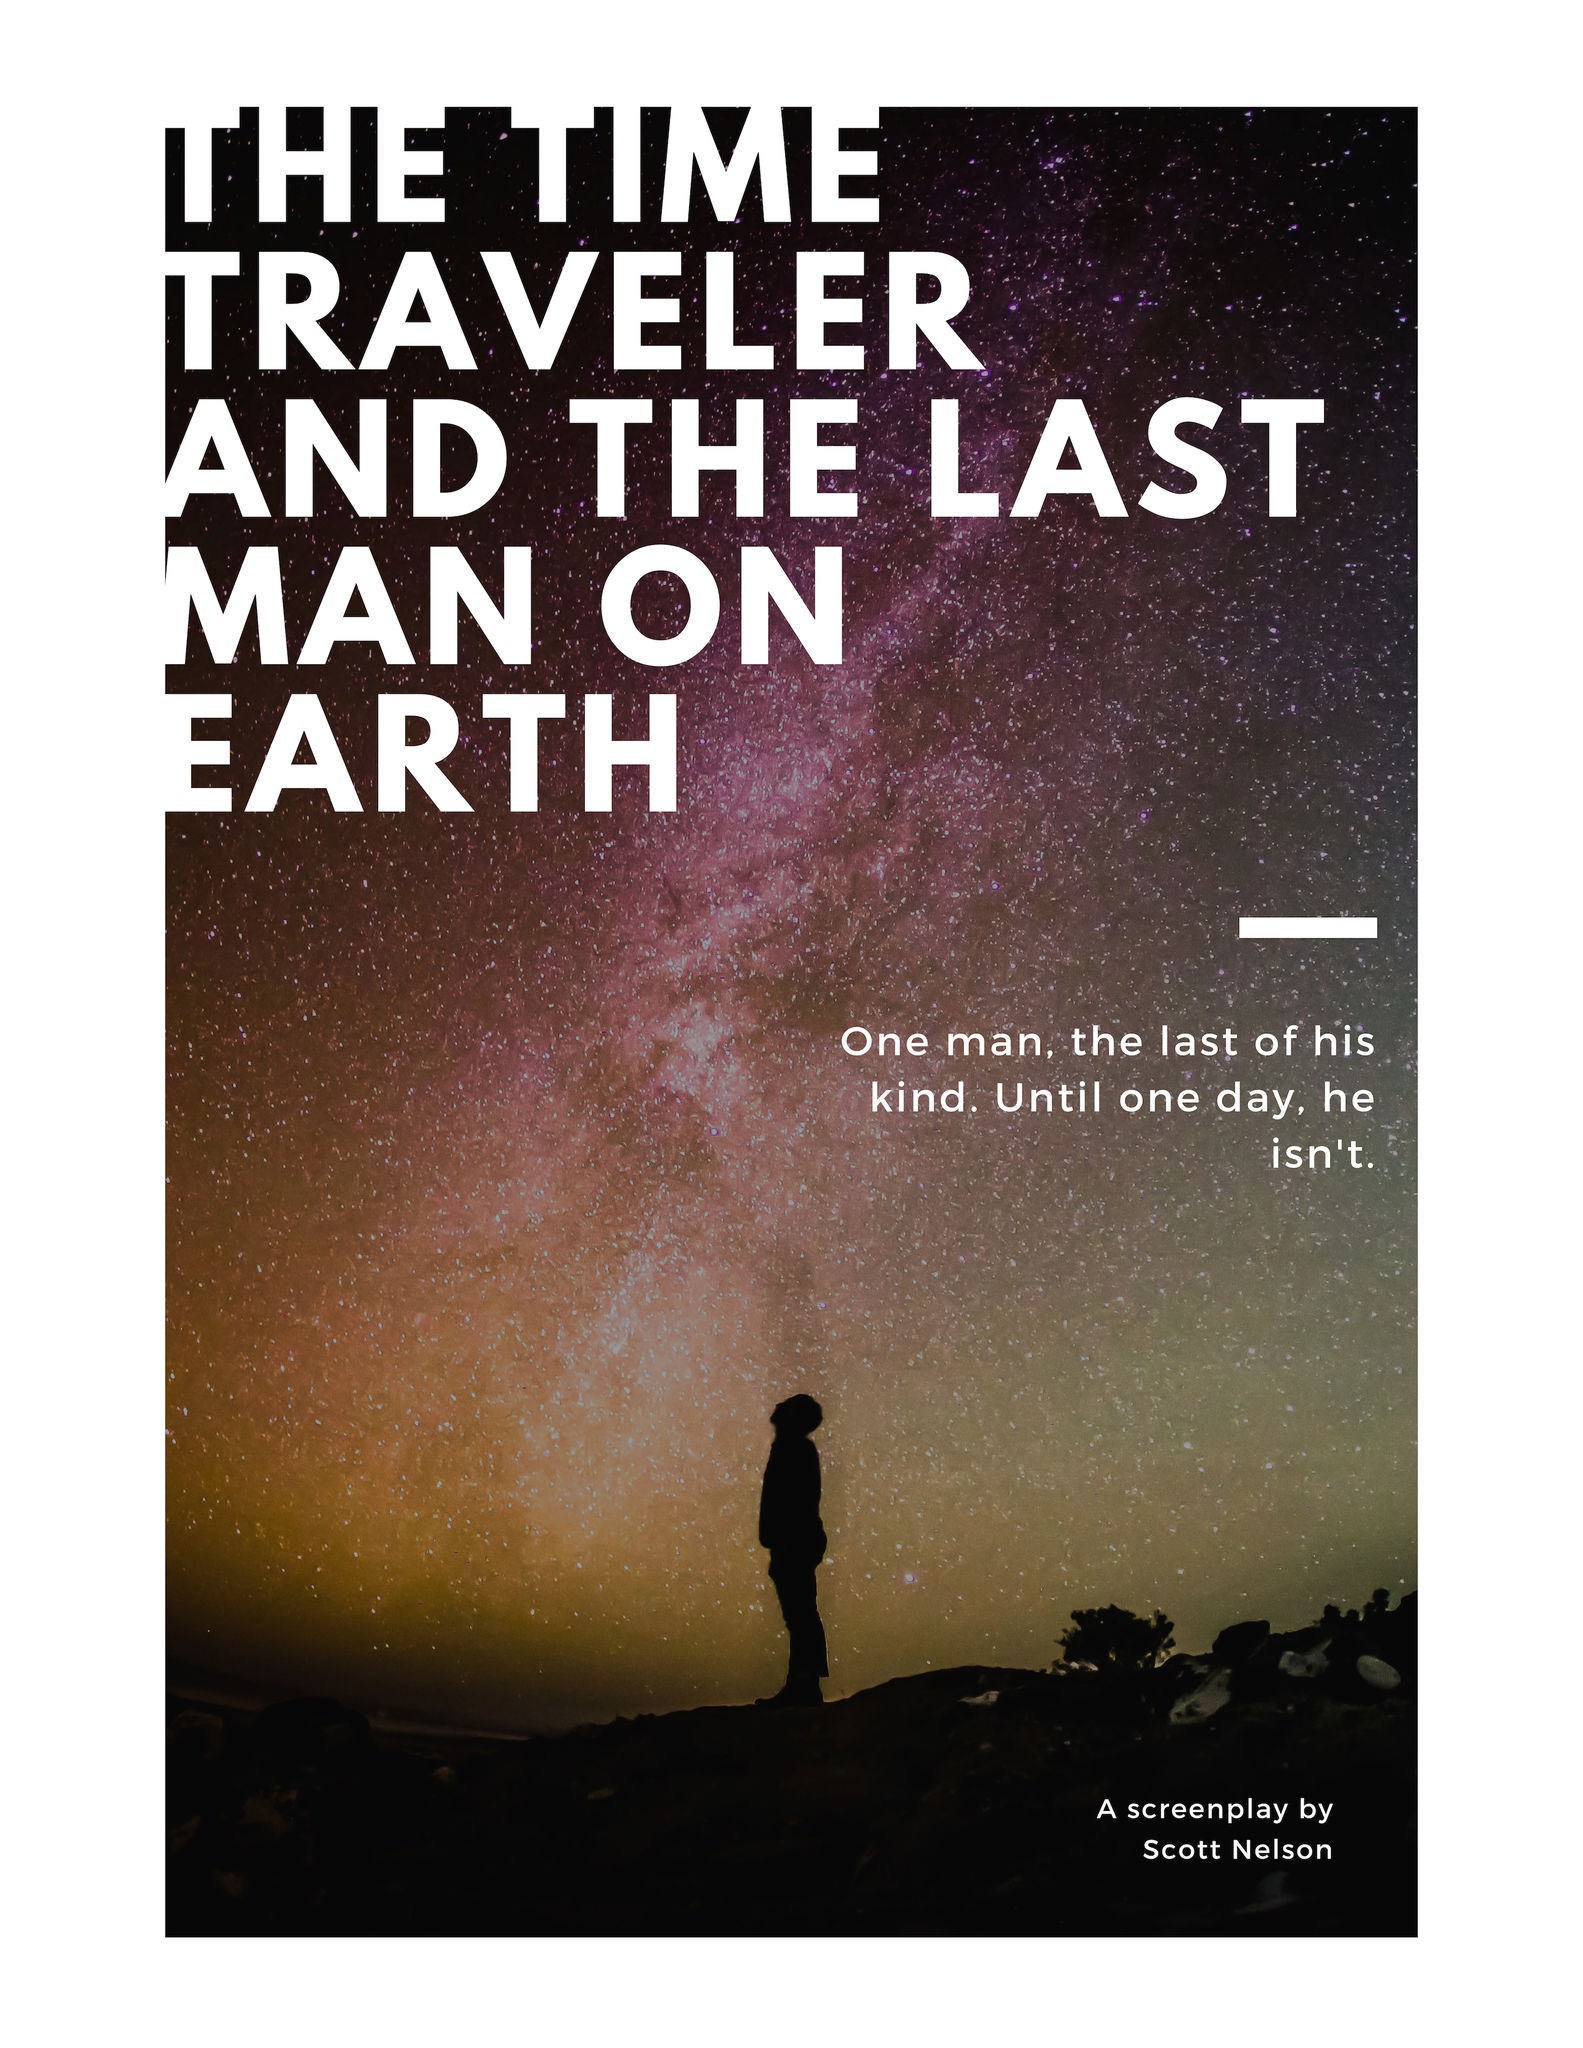 THE TIME TRAVELER AND THE LAST MAN ON EARTH